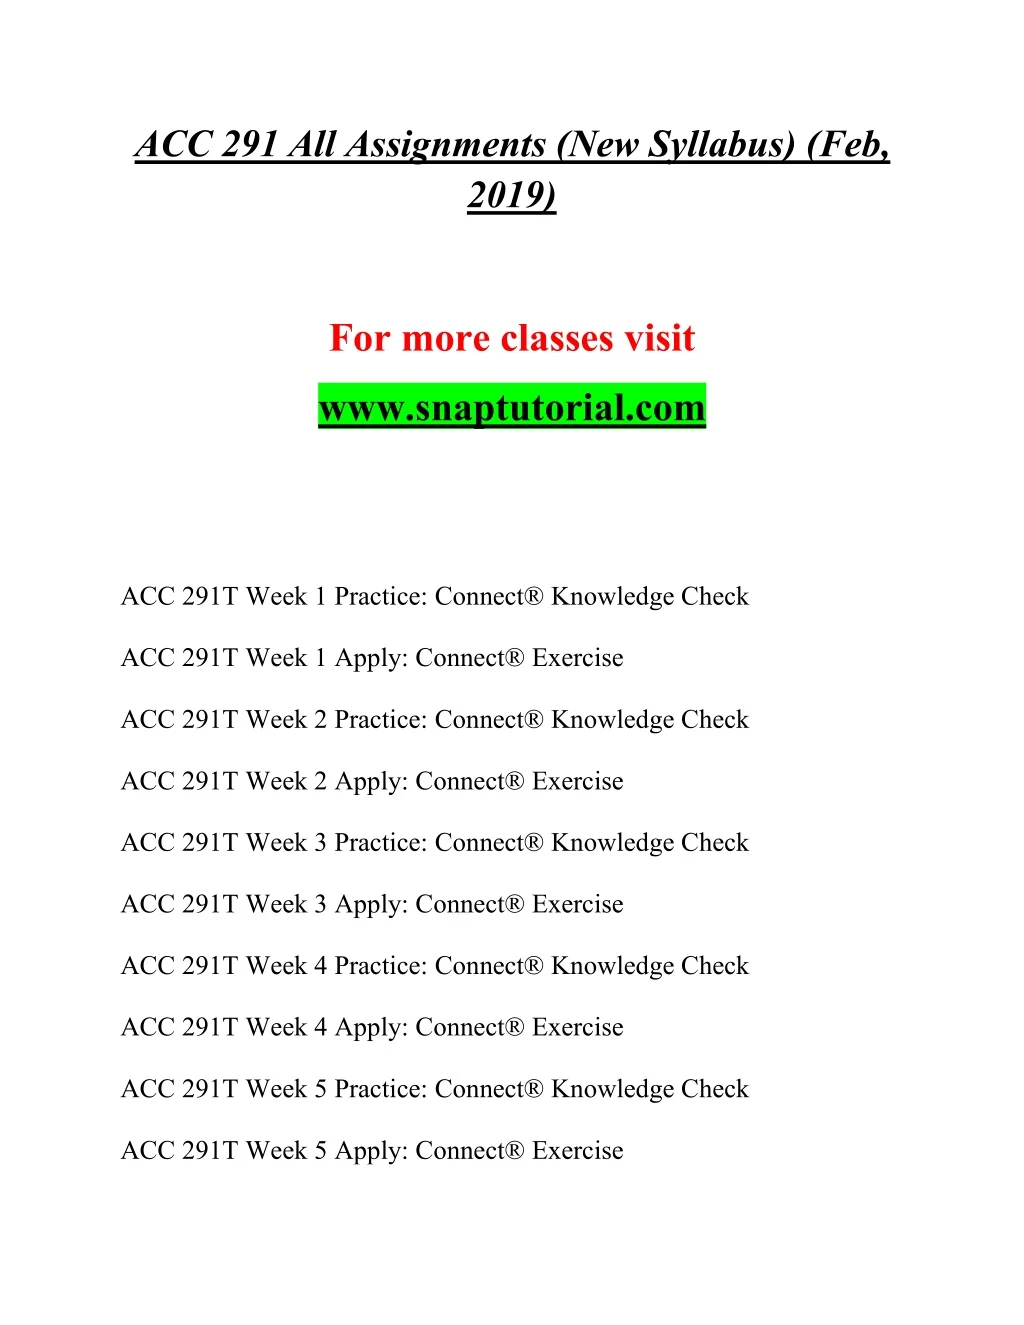 acc 291 all assignments new syllabus feb 2019